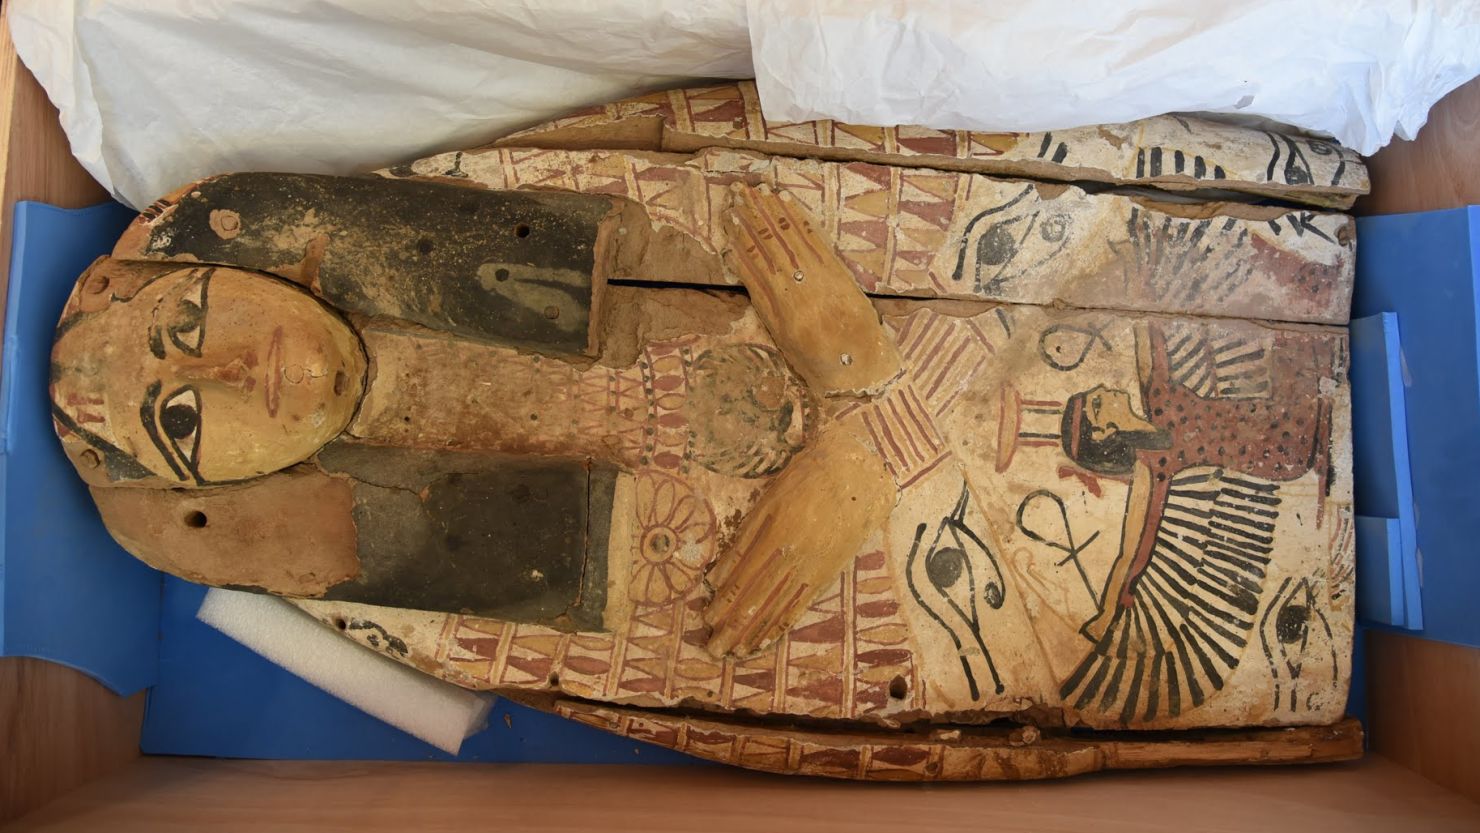 The Israeli Ministry of Foreign Affairs handed over to Egypt two ancient relics that reached Israel illegally.